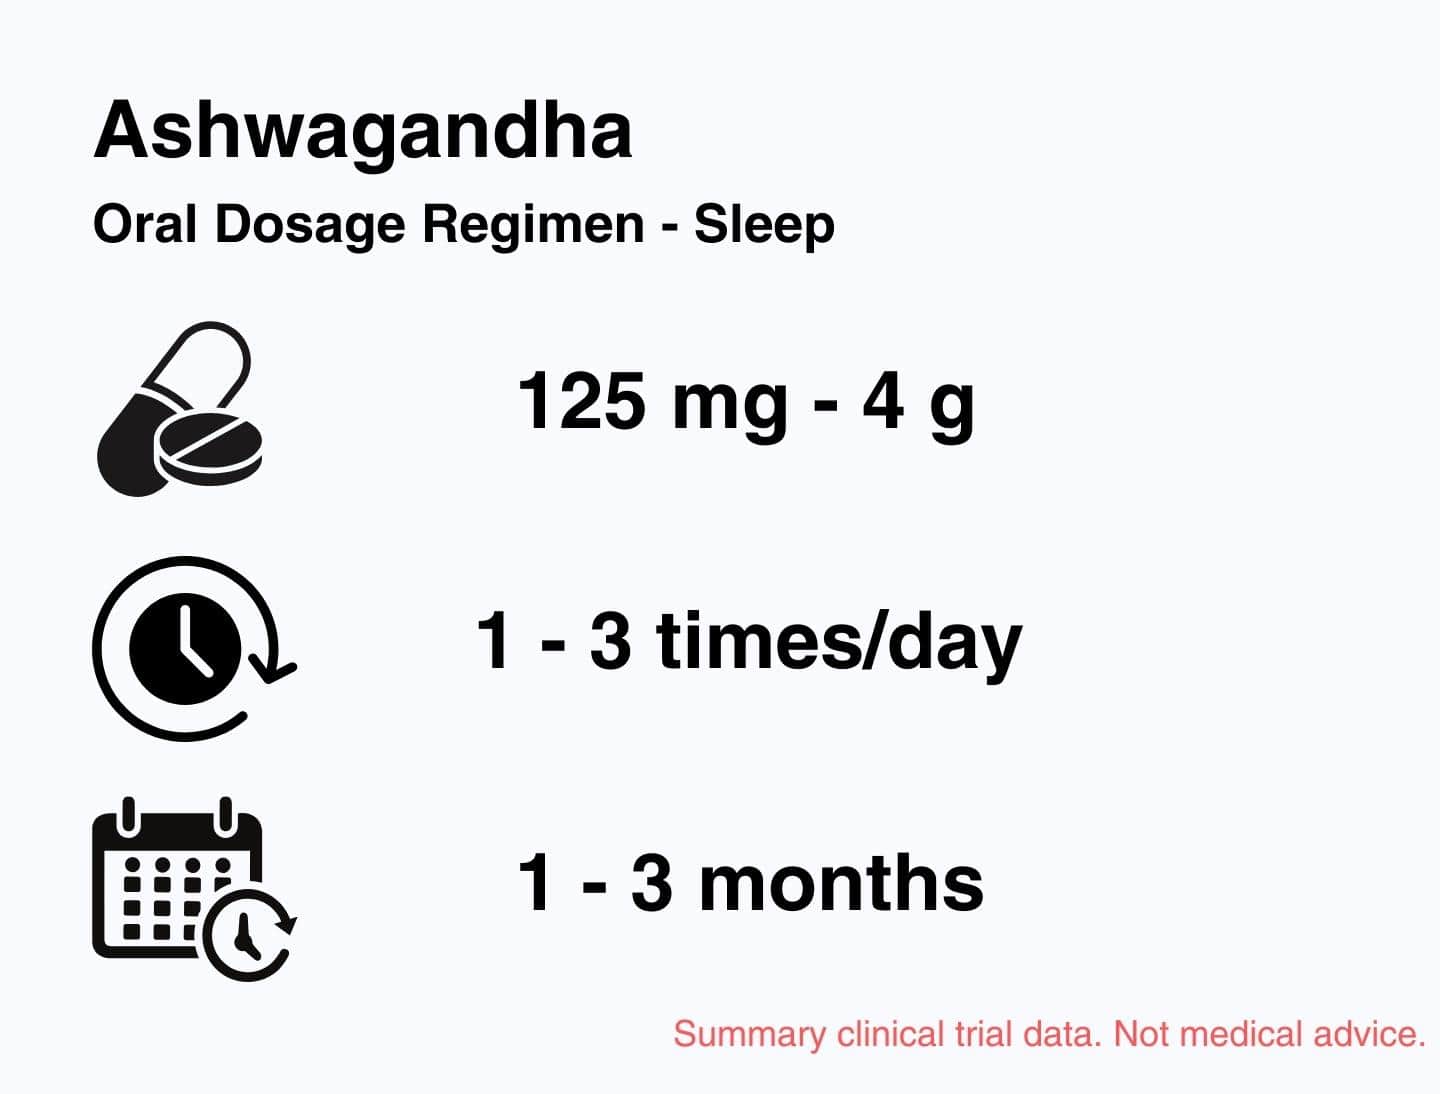 This image shows that The ashwagandha dose used for sleep in clinical trials was 125 mg – 4 g of an ashwagandha supplement, 1–3 times a day, for 1–3 months.